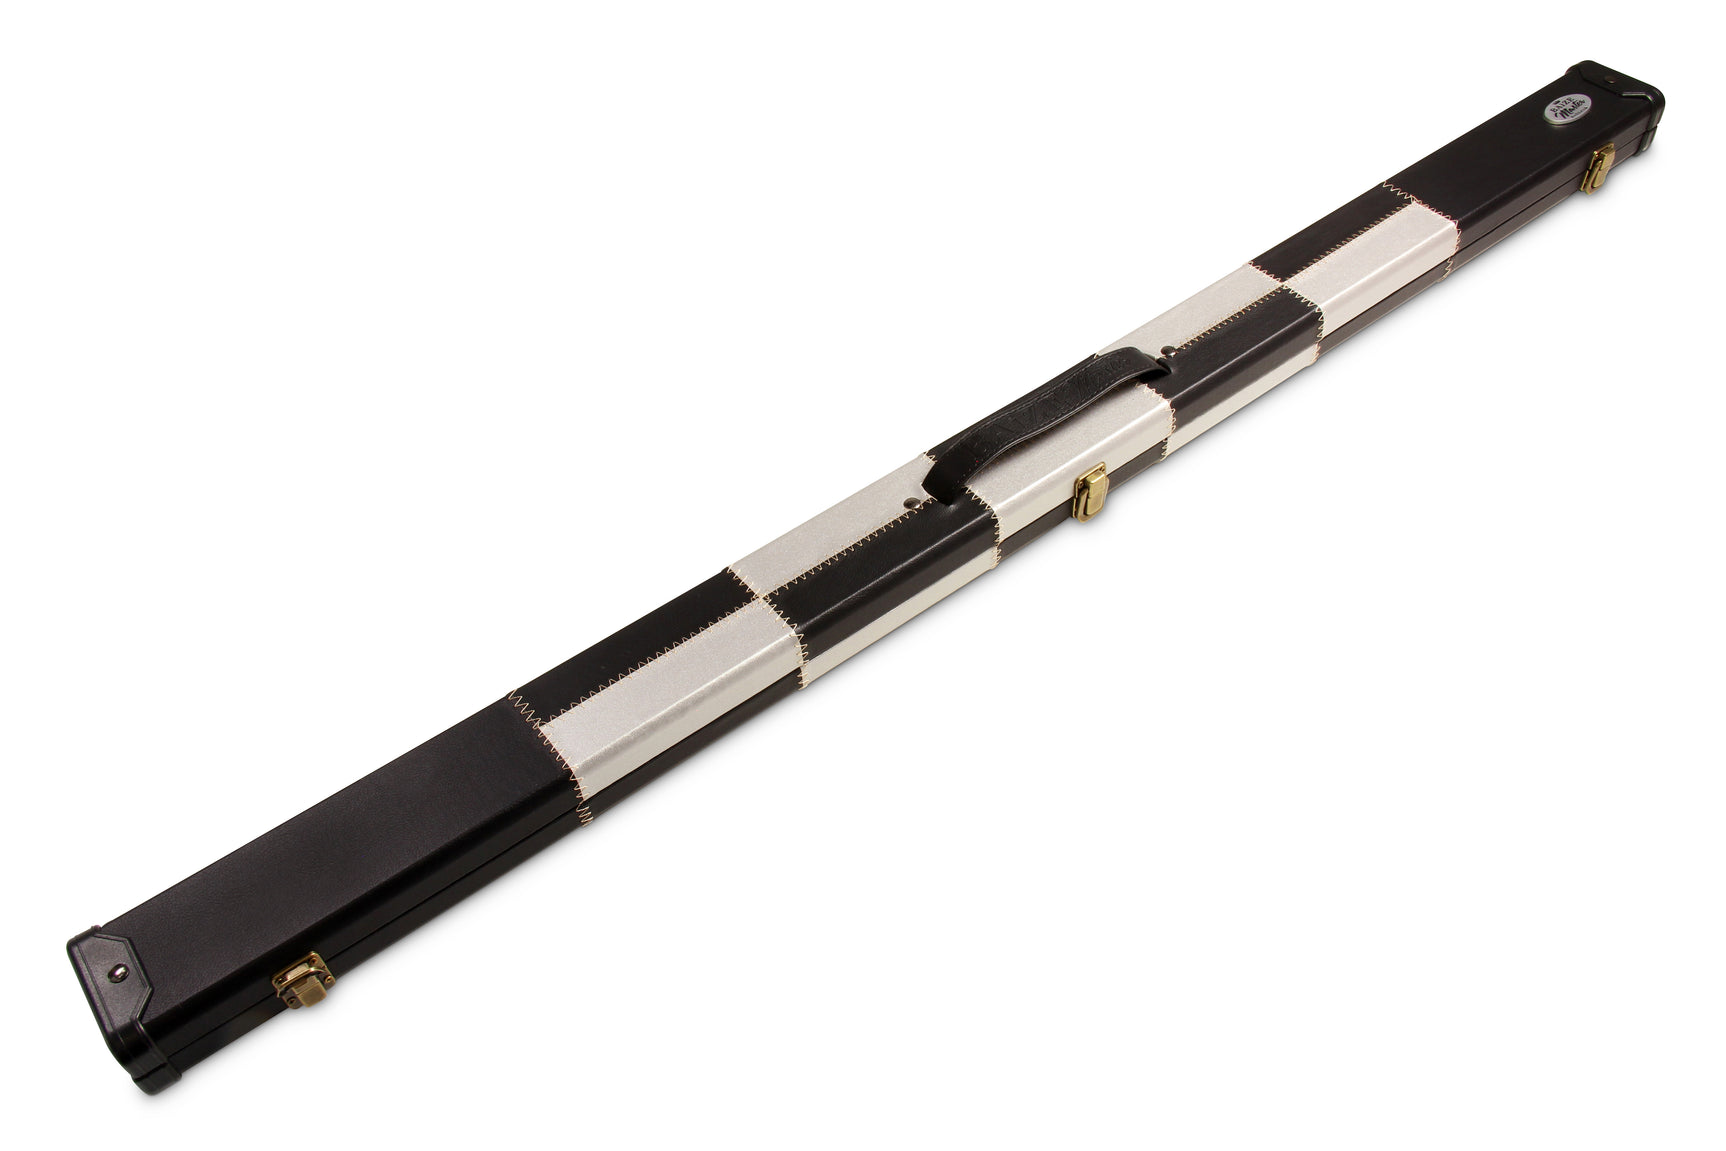 Baize Master 3/4 Deluxe BLACK AND SILVER CHEQUERED Snooker Cue Case with Plastic Ends and Metal Badge